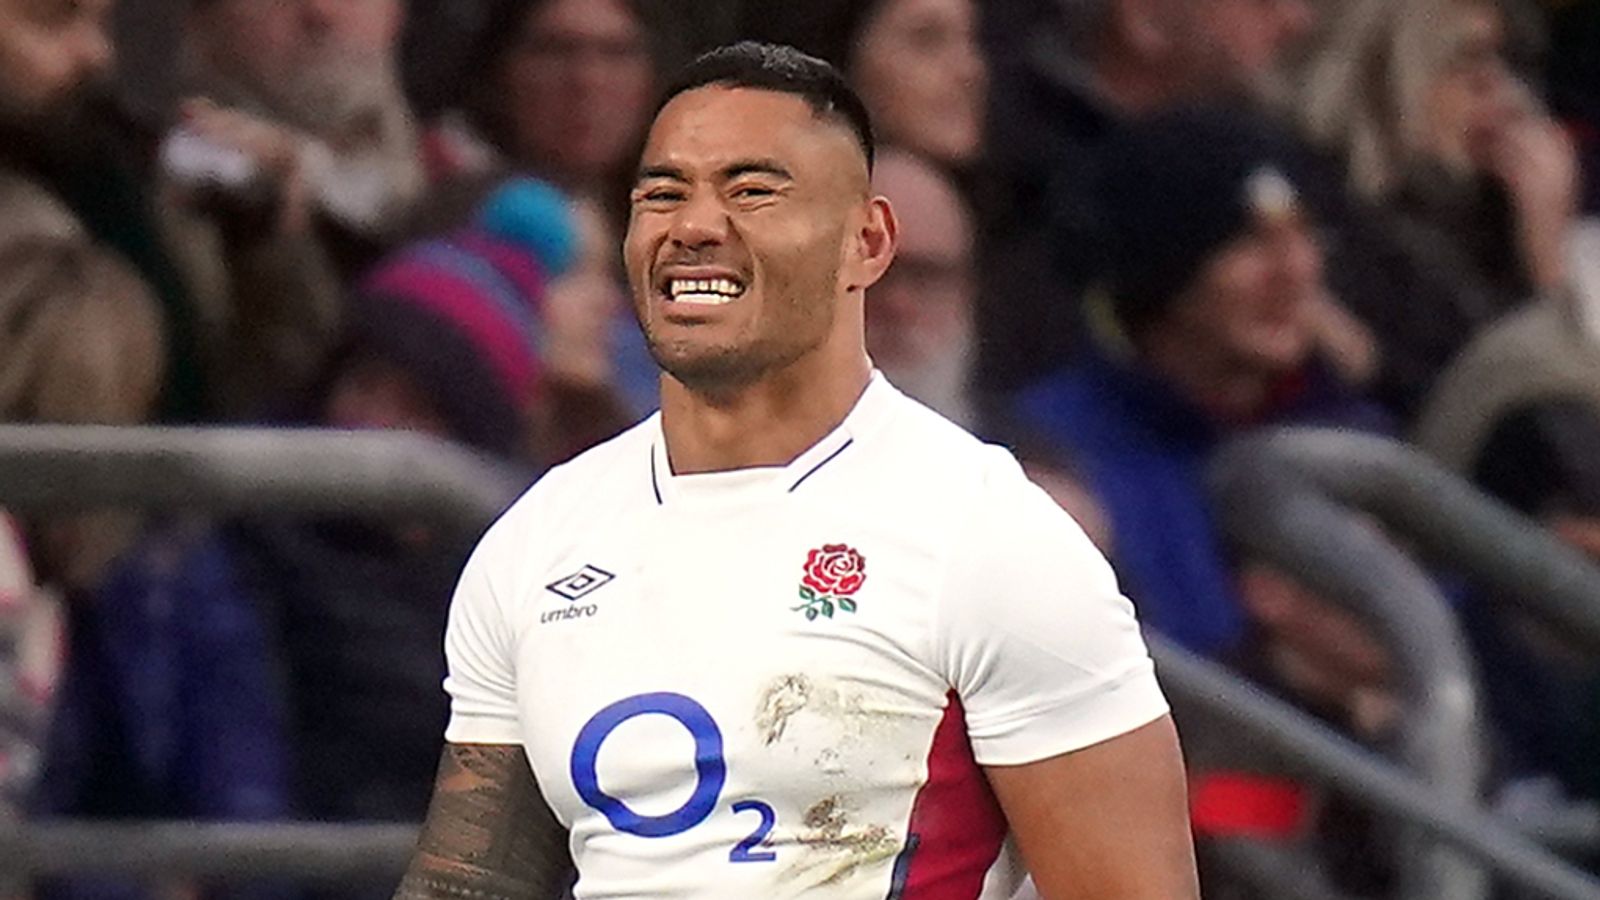 Exclusive: Manu Tuilagi ends England exit fears by signing new Sale Sharks  contract